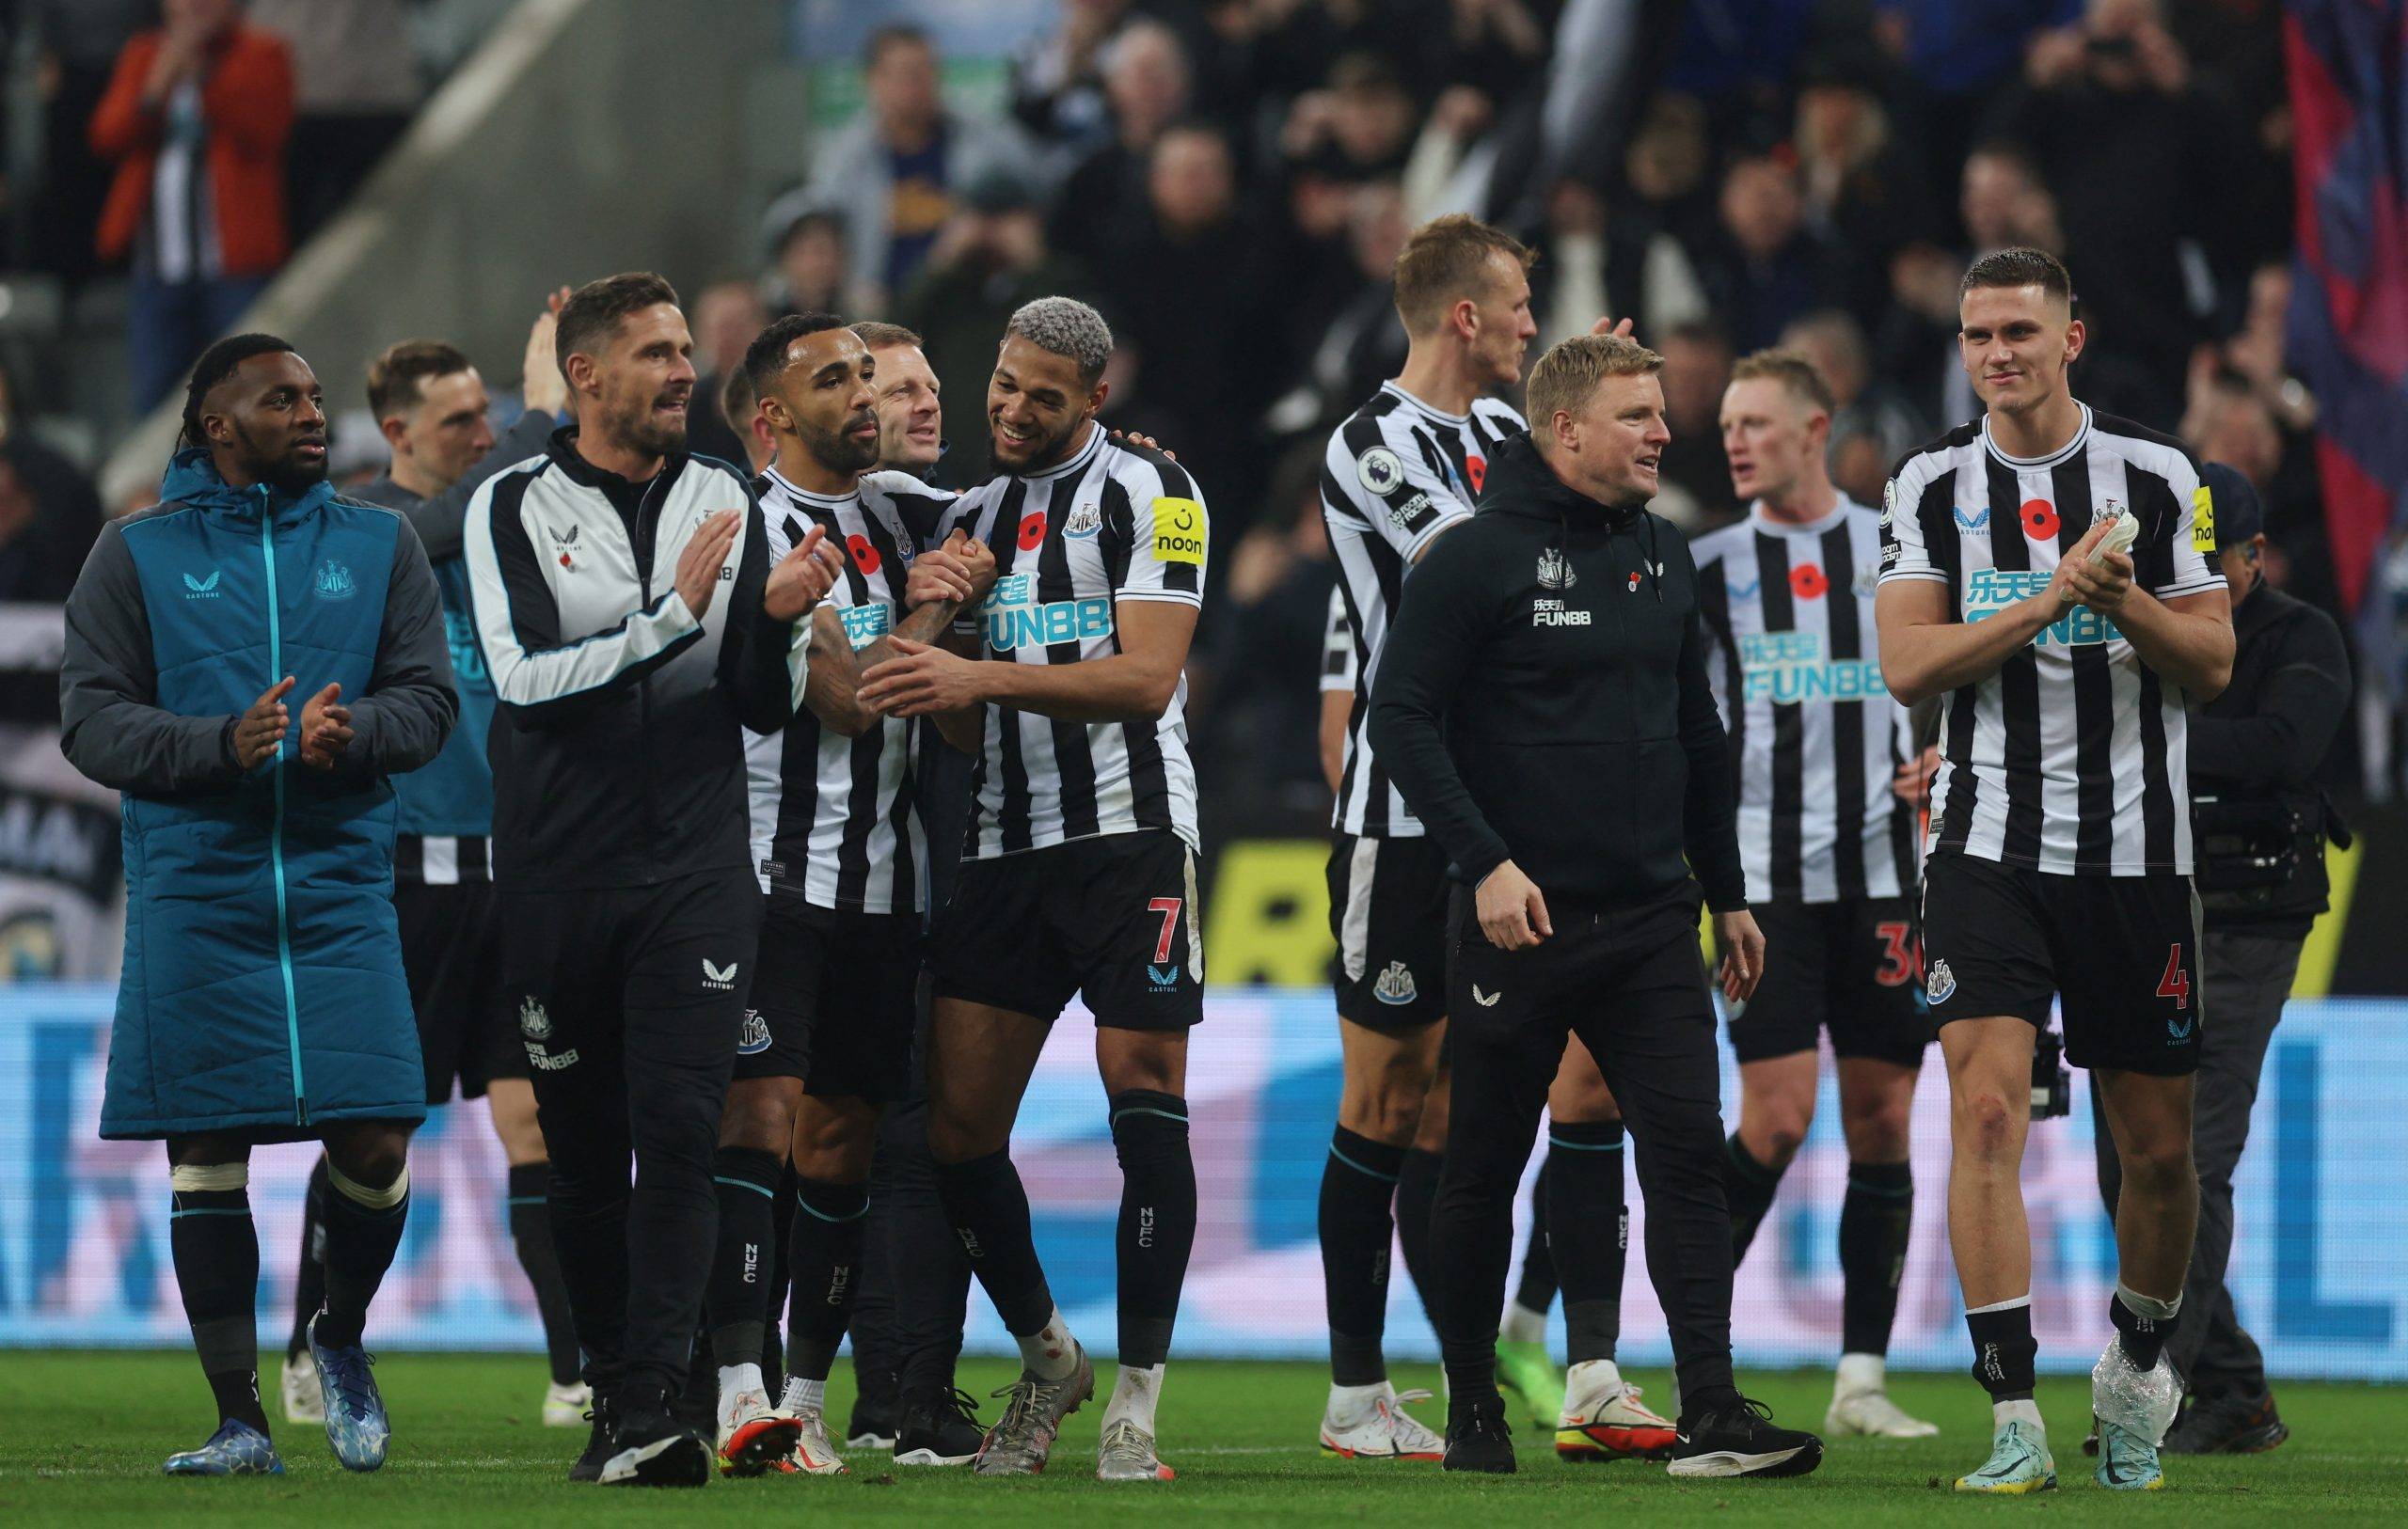 Newcastle: Sky Sports man backs Magpies to "spend even more" - Follow up